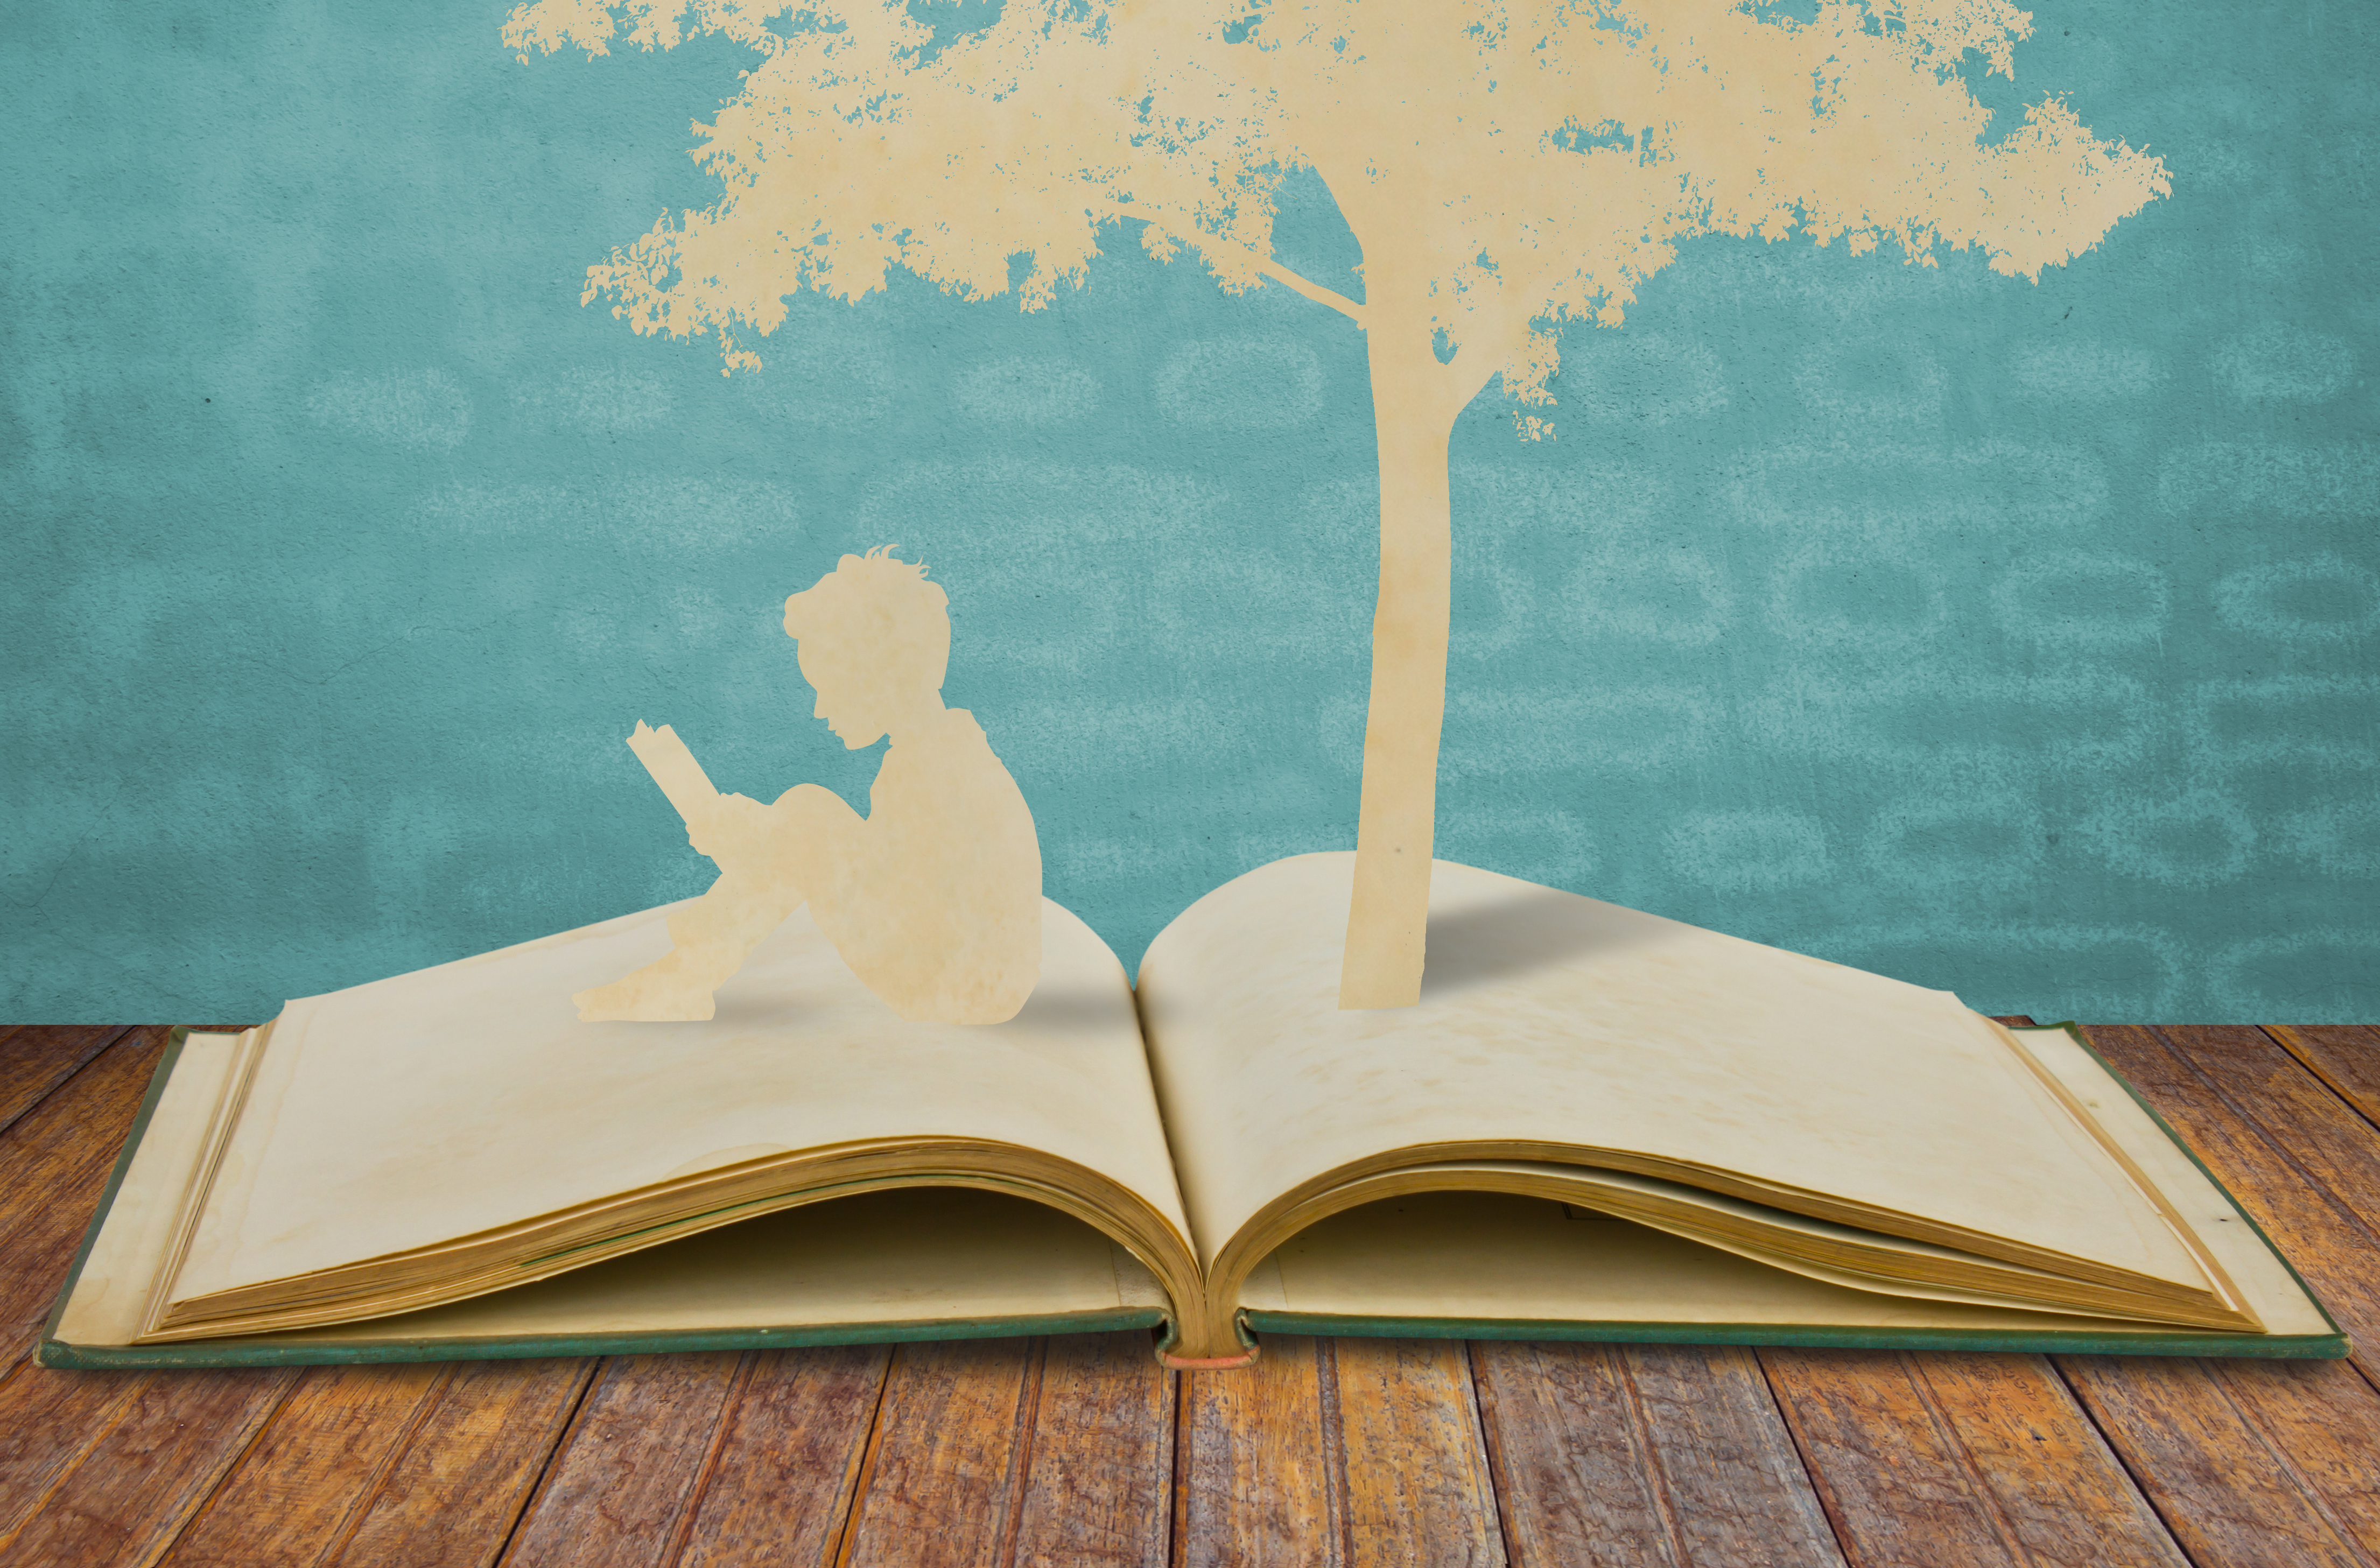 Paper cut of children read a book under tree on old book